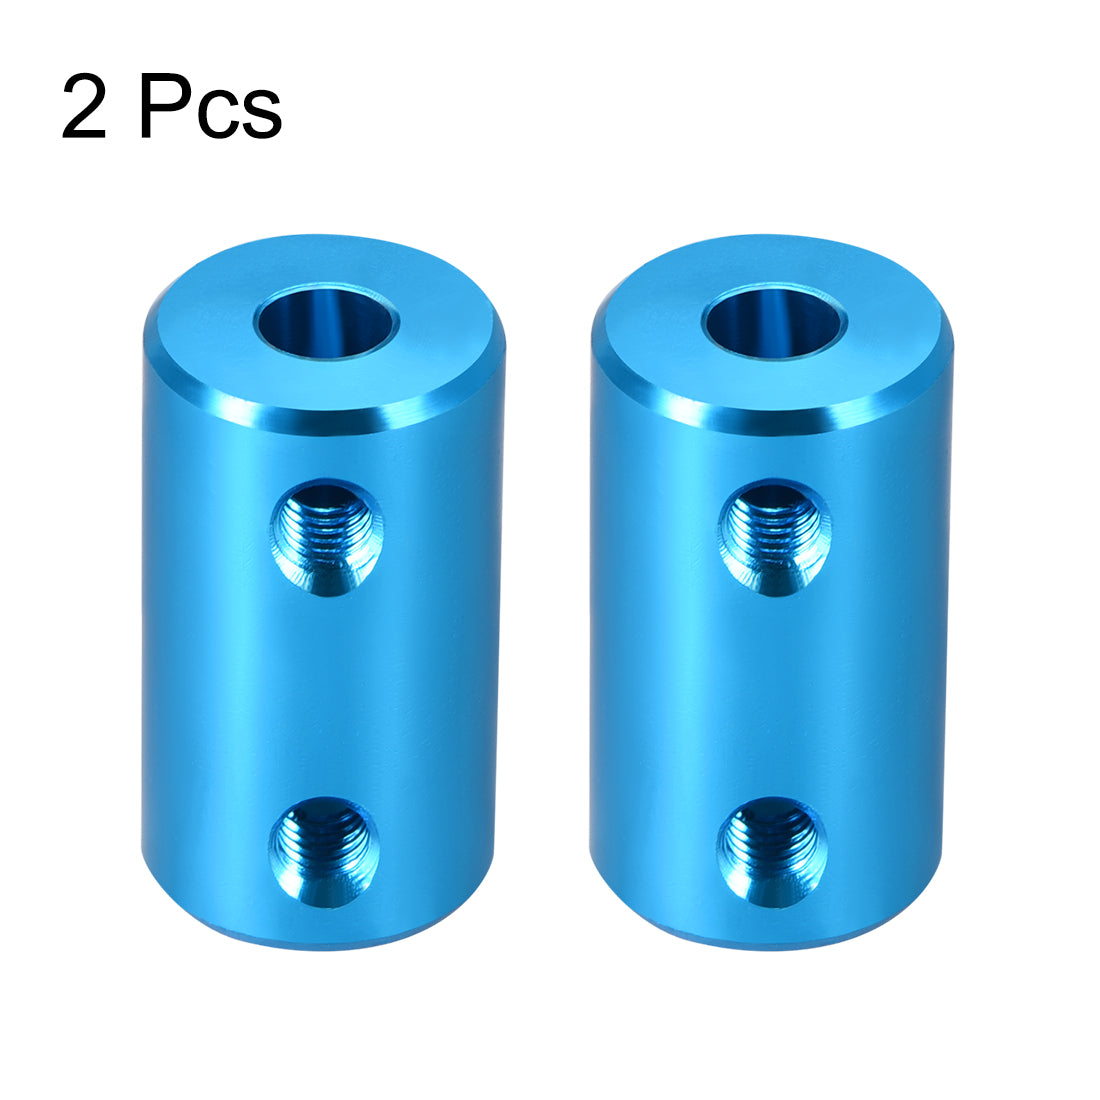 uxcell Uxcell Shaft Coupling 5mm to 5mm Bore L25xD14 Robot Motor Wheel Rigid Coupler Connector Blue 2 PCS